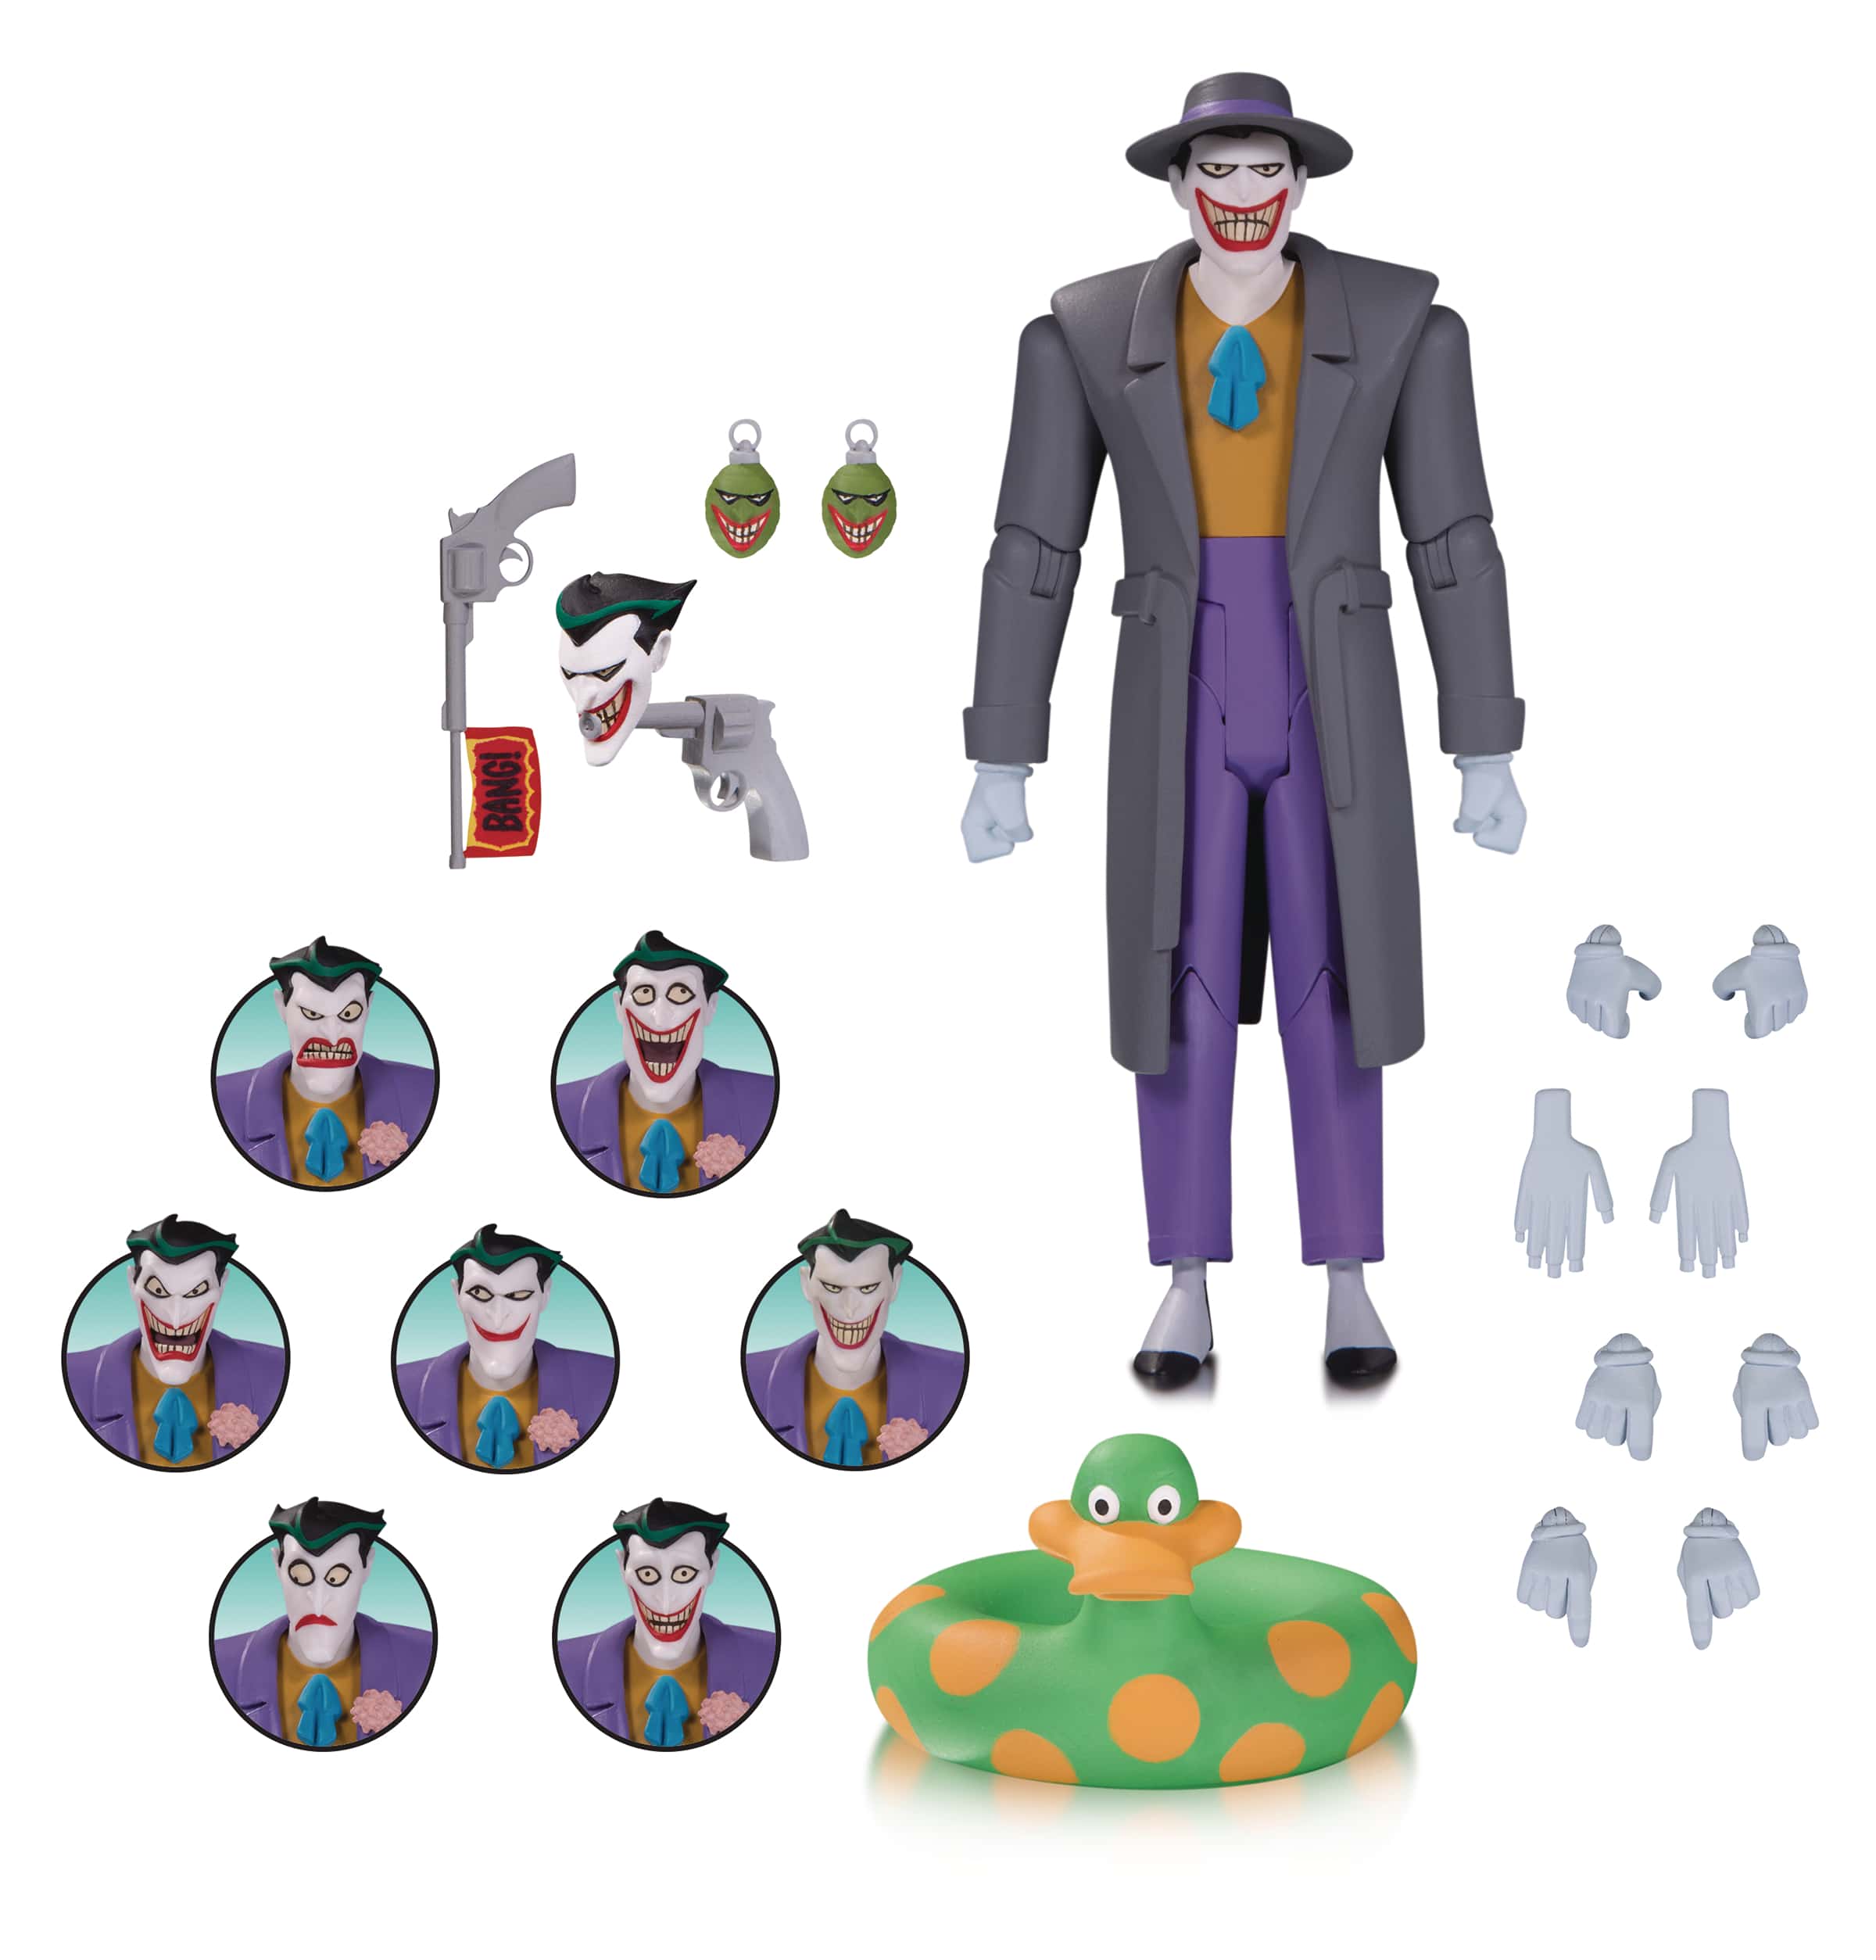 JOKER EXPRESSIONS PACK FIGURA 15,74 CM THE ANIMATED SERIES UNIVERSO DC